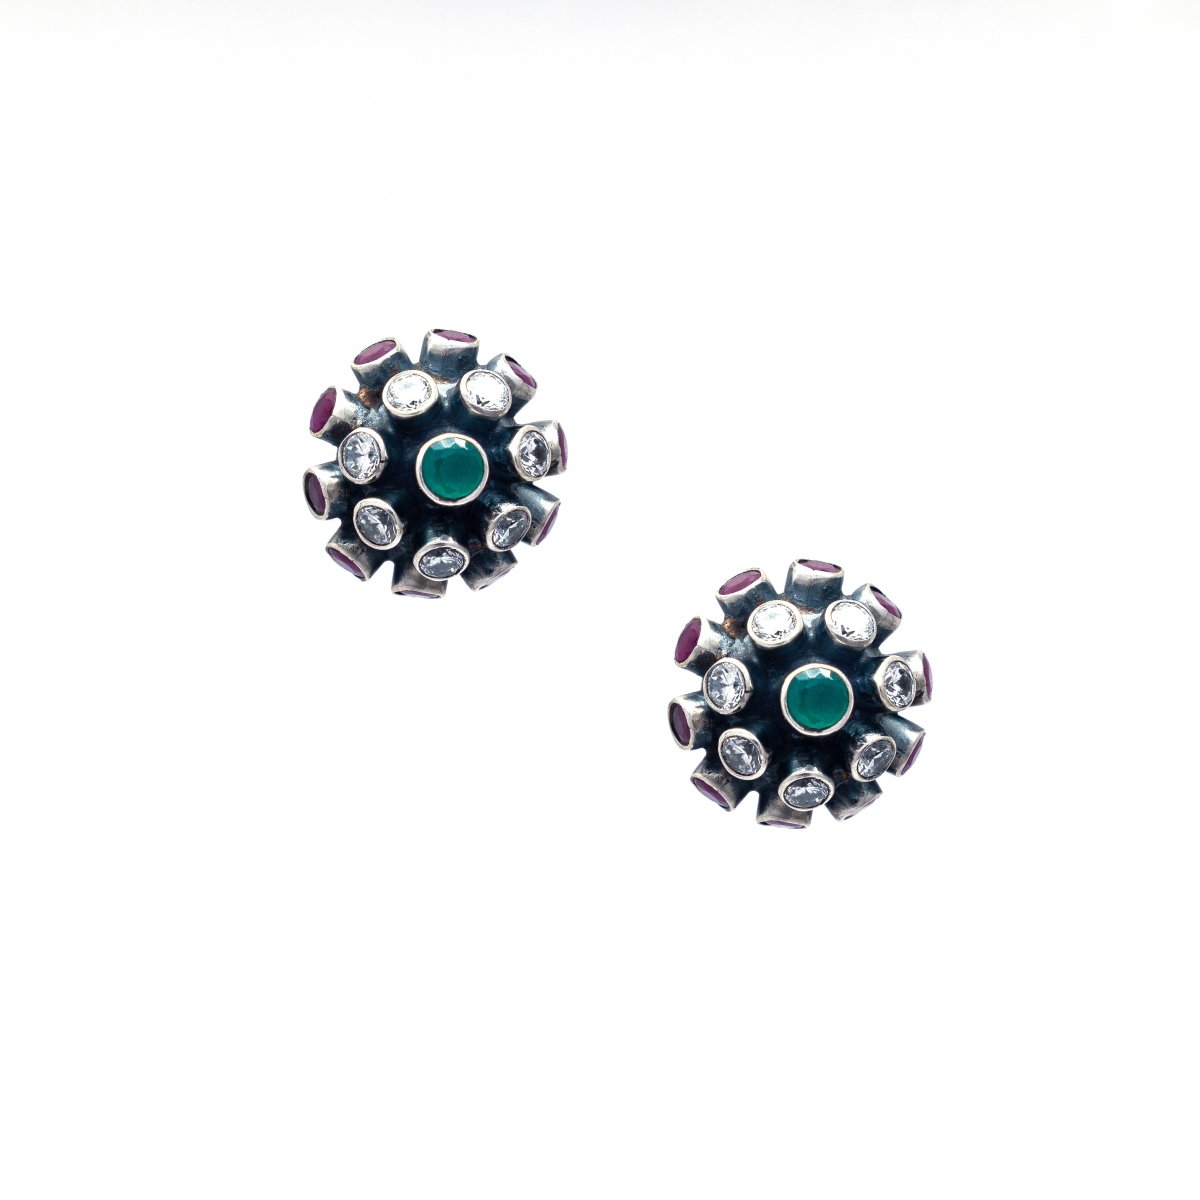 LIGHTWEIGHT SILVER OXIDIZED EARRINGS FOR WOMEN AND GIRLS